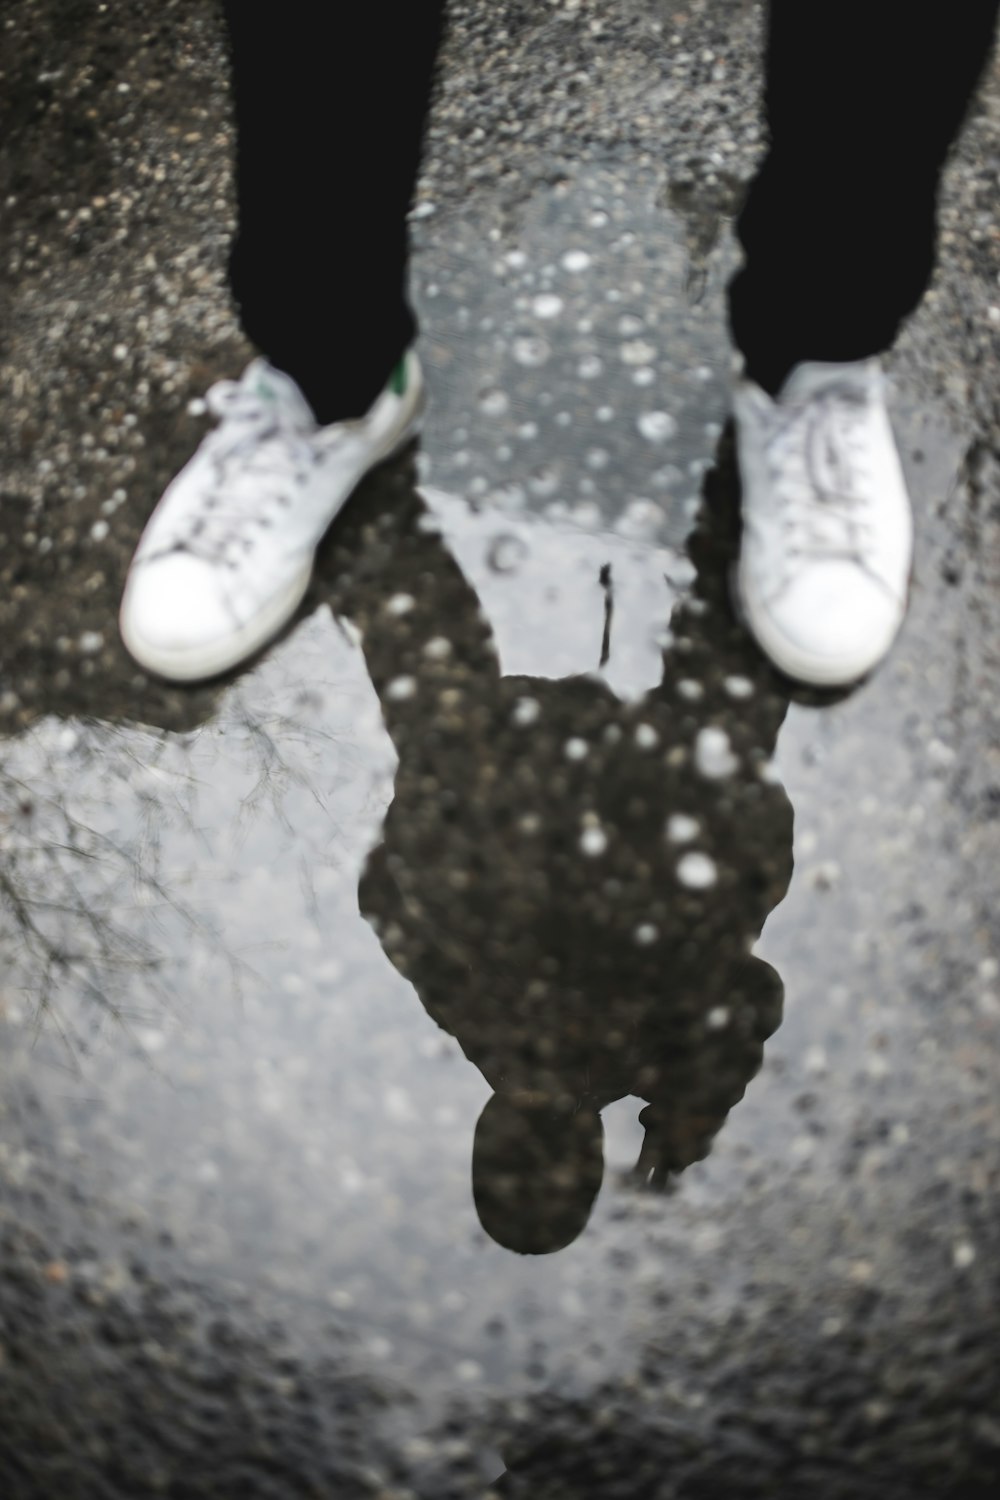 reflection of person standing on ground